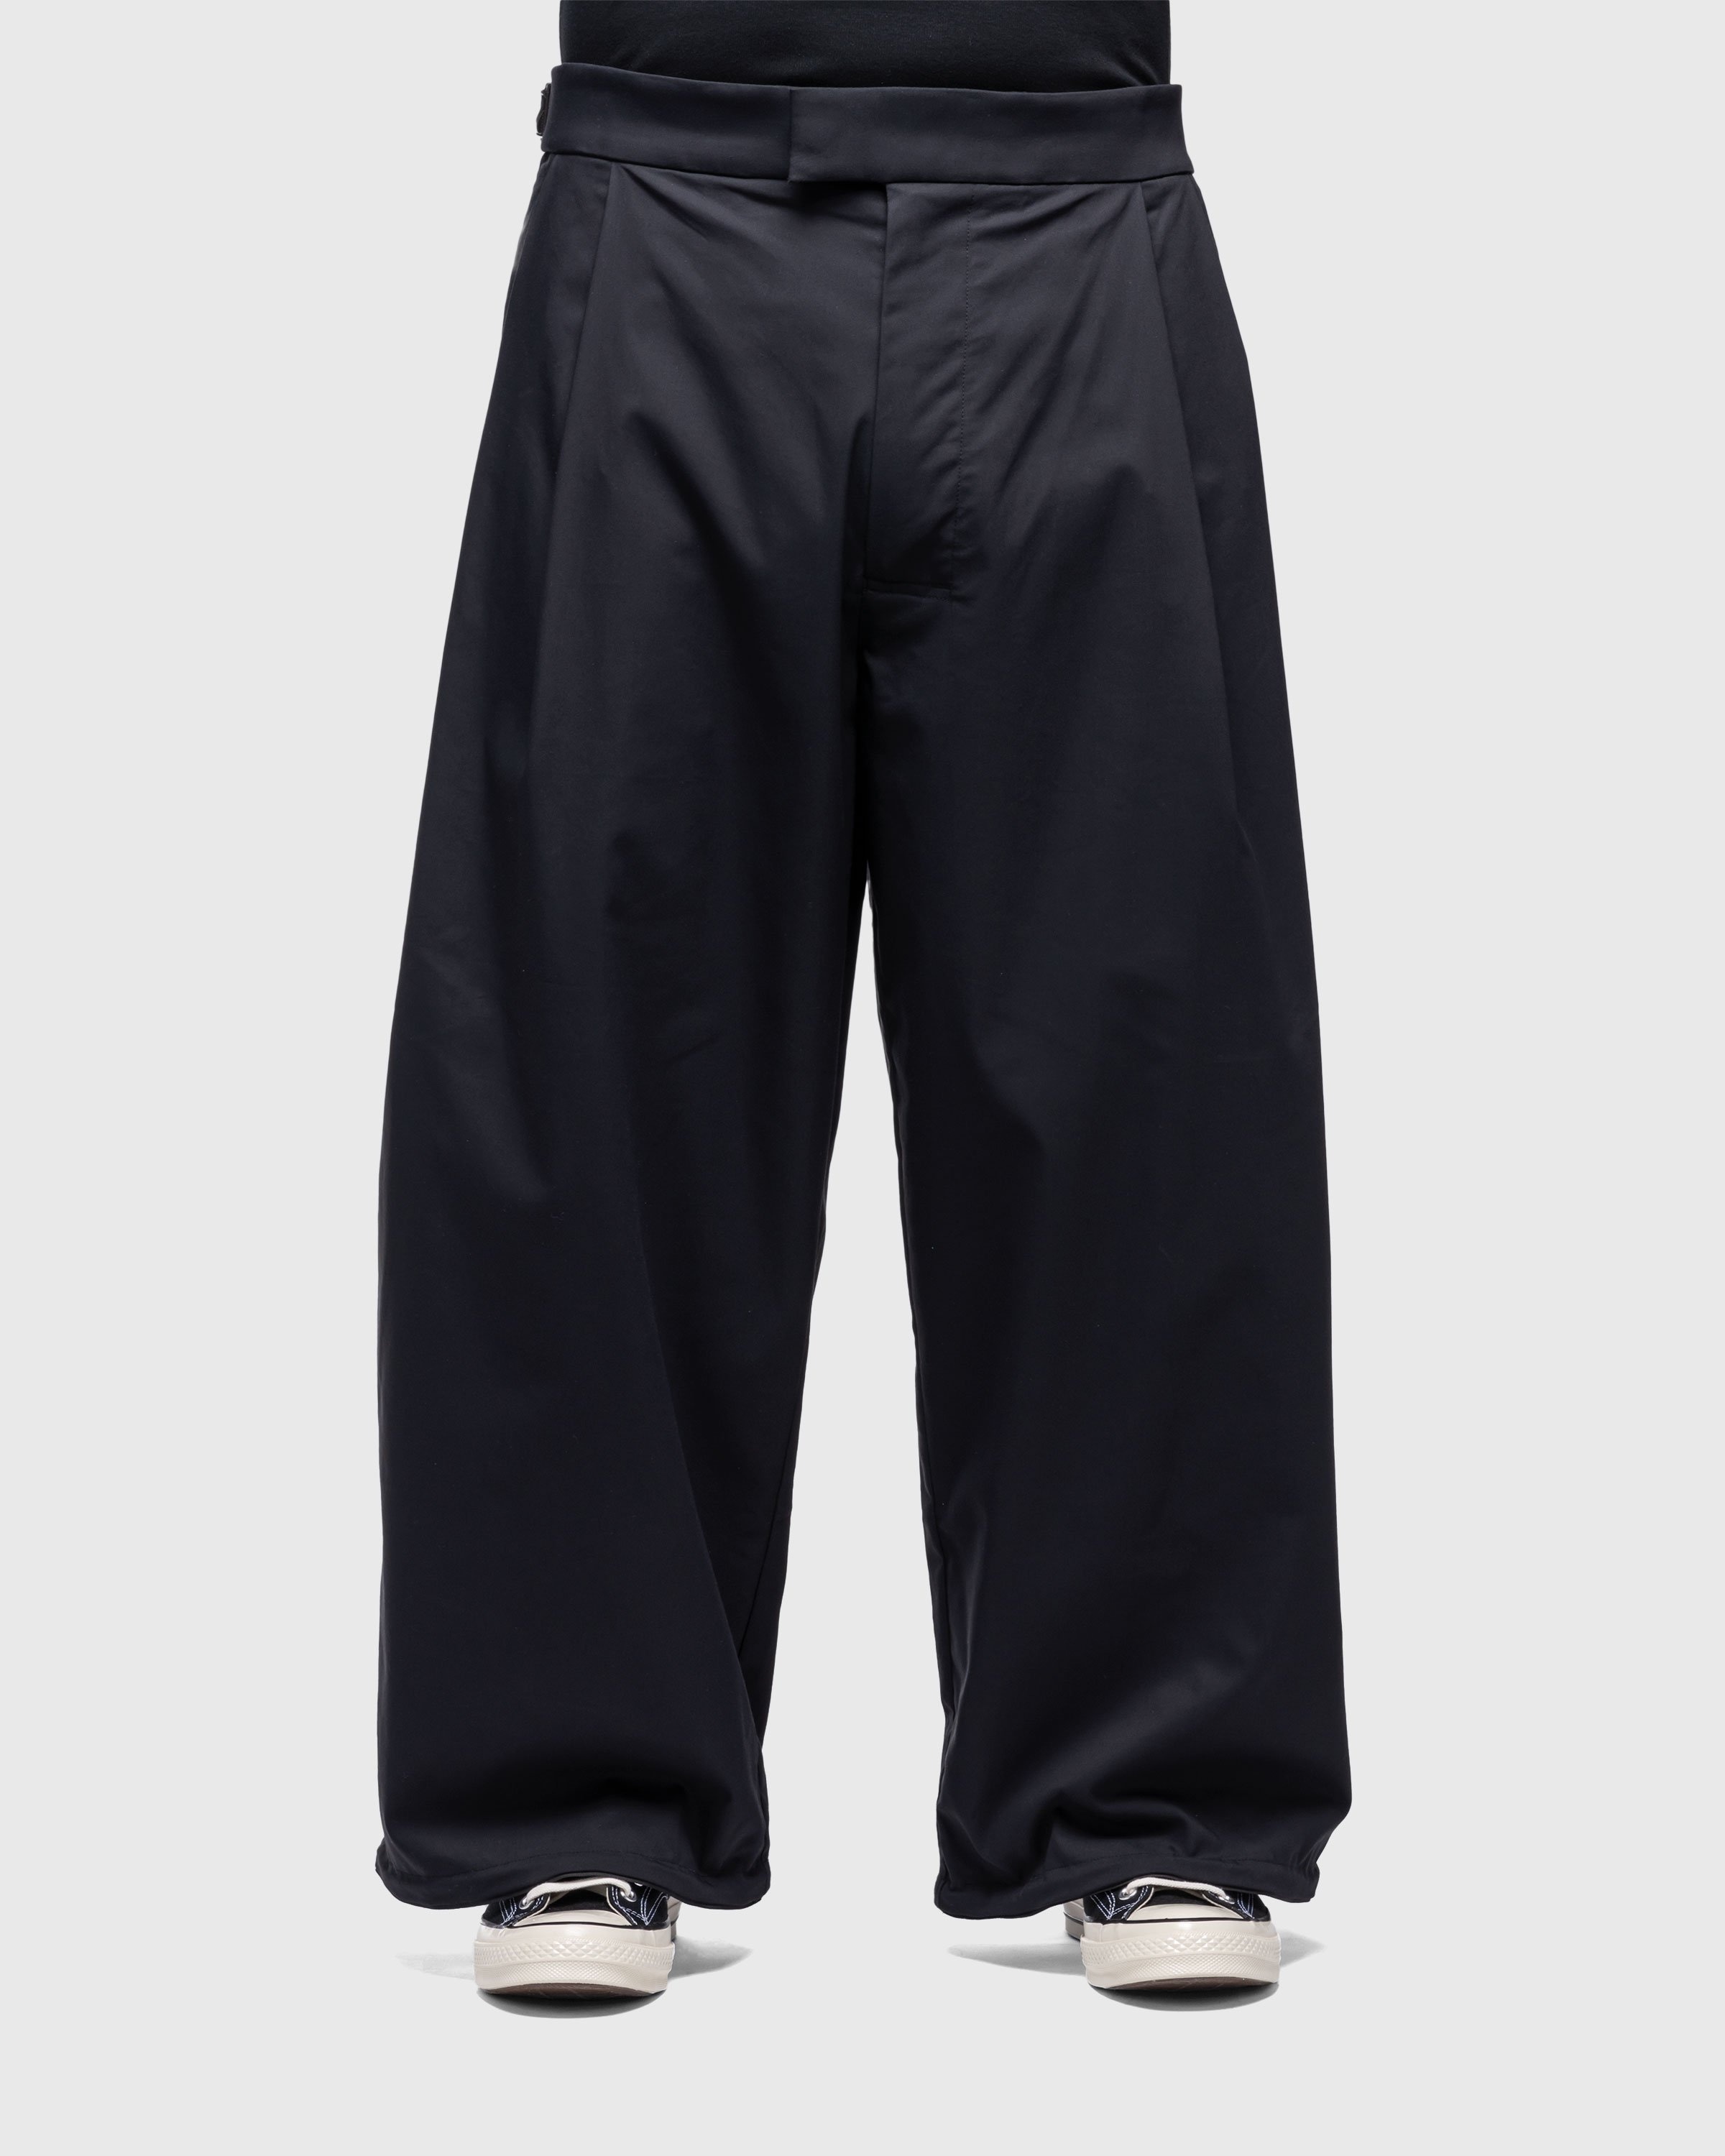 ACRONYM – P48-CH Micro Twill Pleated Trouser Black - Trousers - Black - Image 2